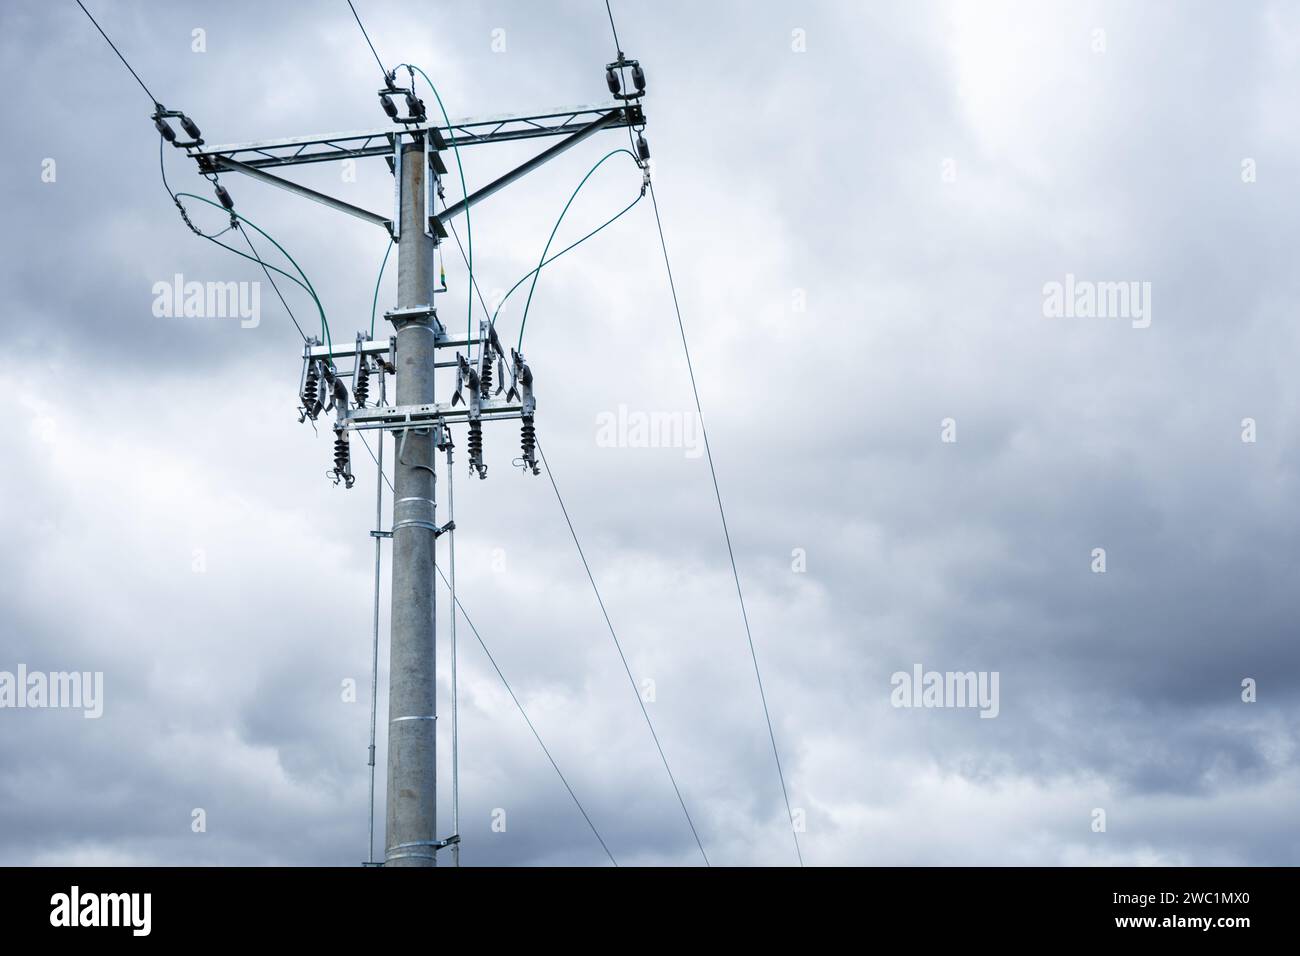 high voltage overhead line, pole with insulators and disconnectors, dark clouds in the background Stock Photo